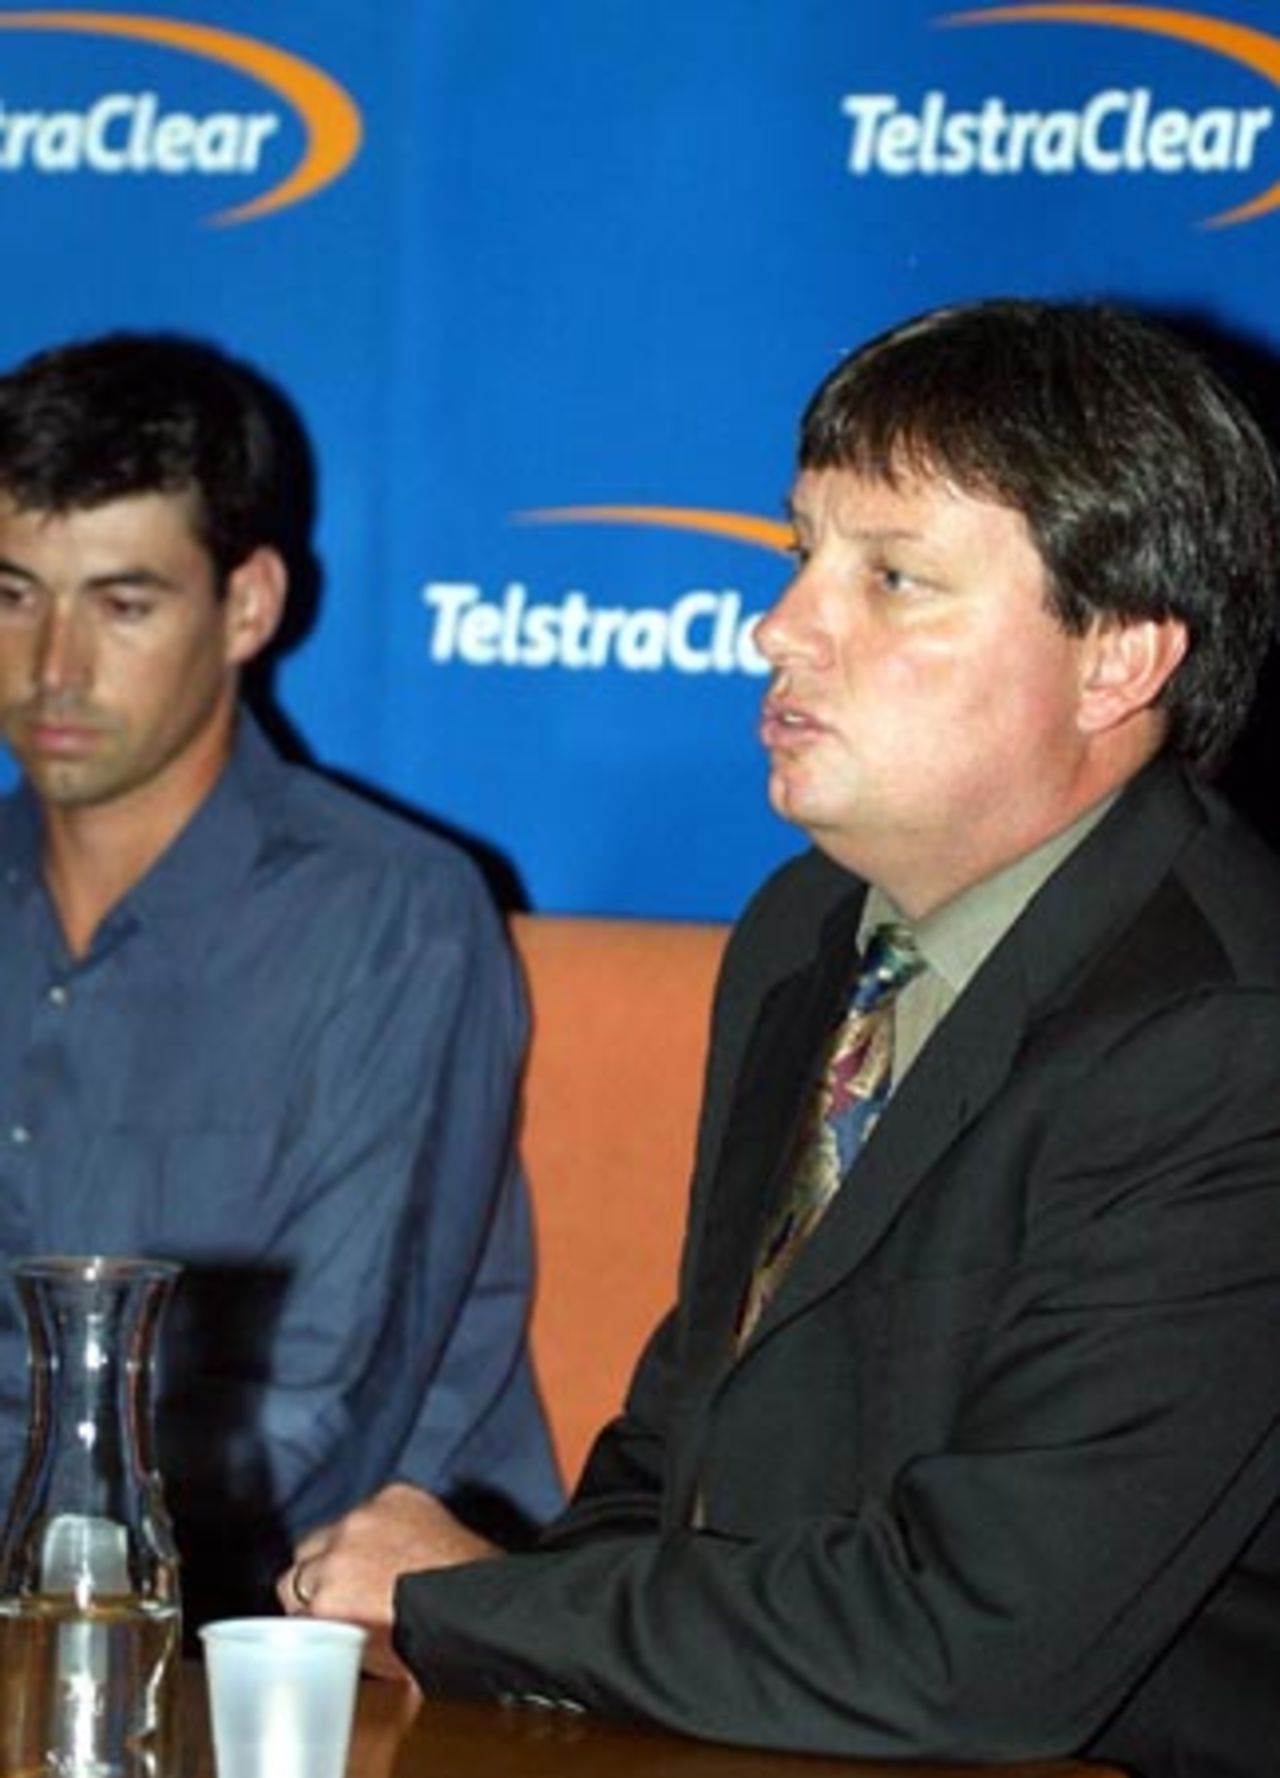 New Zealand Cricket chief executive Martin Snedden (right) speaks at a press conference at Auckland Airport while captain Stephen Fleming looks on. The New Zealand team returned from Pakistan after a bomb blast outside their Karachi hotel caused the tour to be cancelled just prior to the second Test. 10 May 2002.